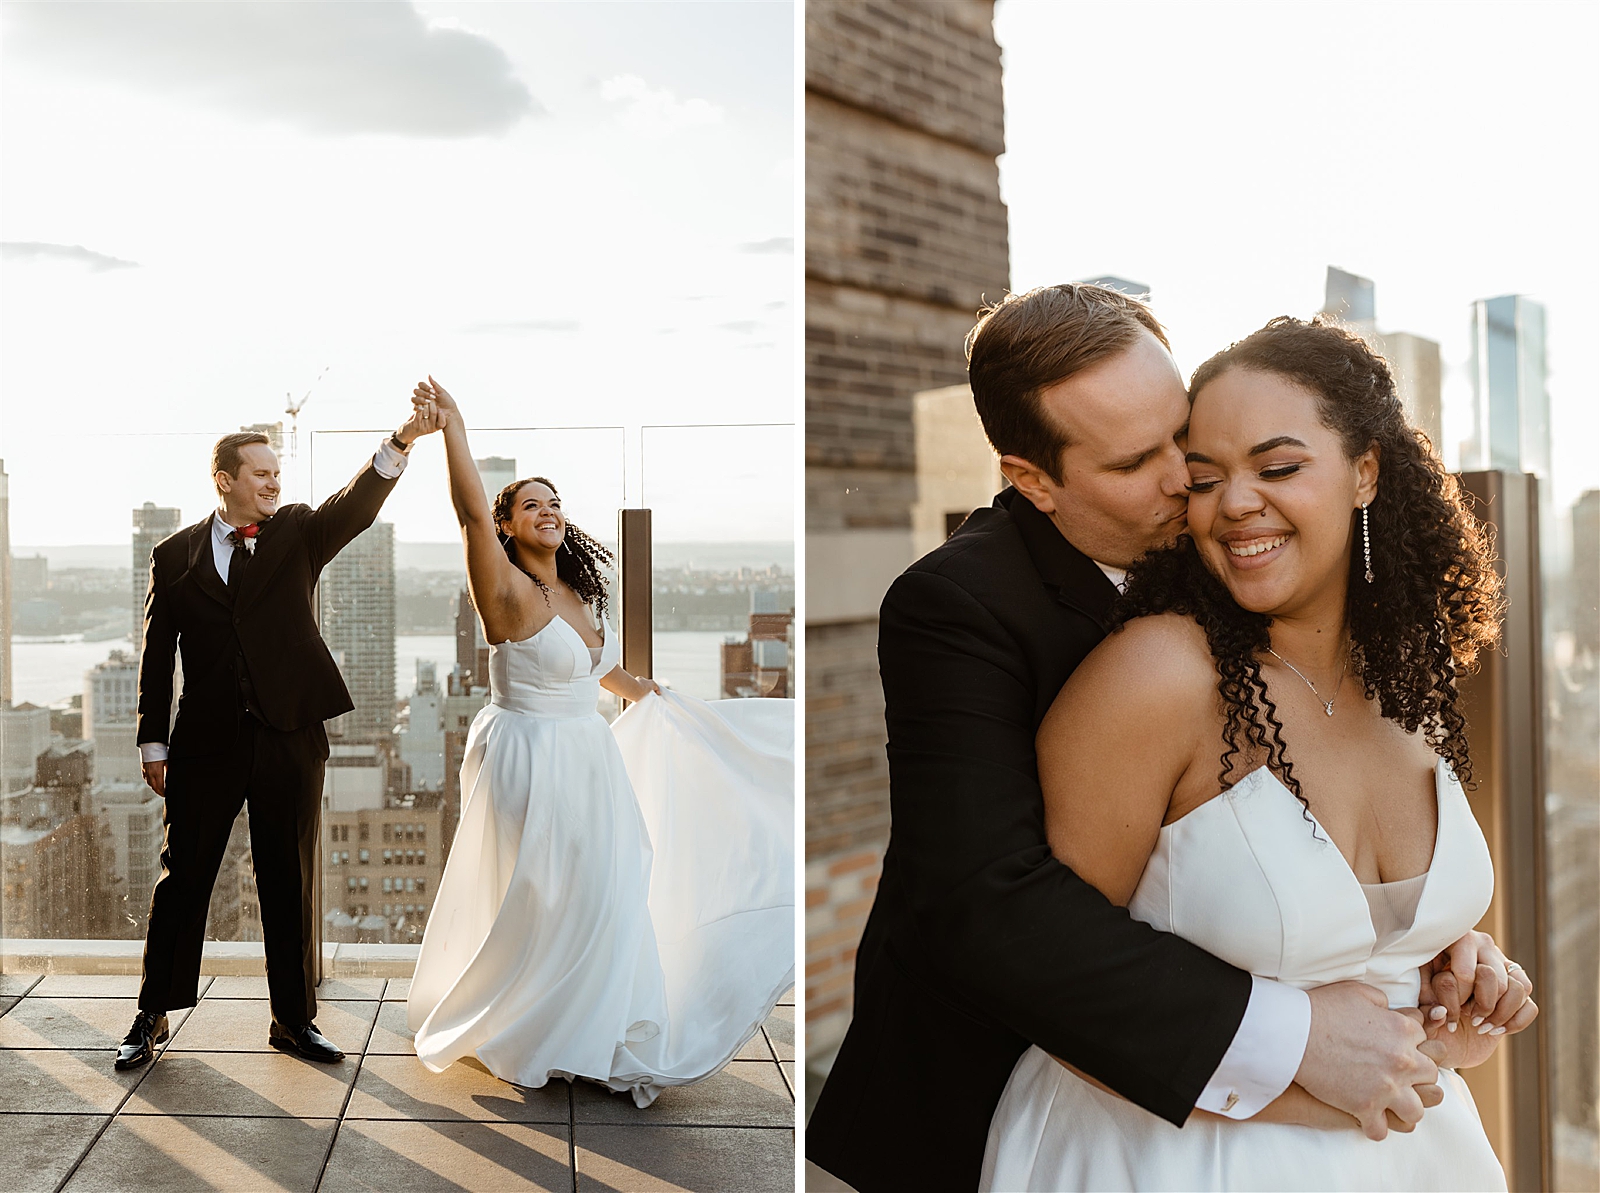 Left photo: Shot of the Groom twirling the Bride on top of the Skylark. 
Right photo: Groom embracing Bride on top of the Skylark. 